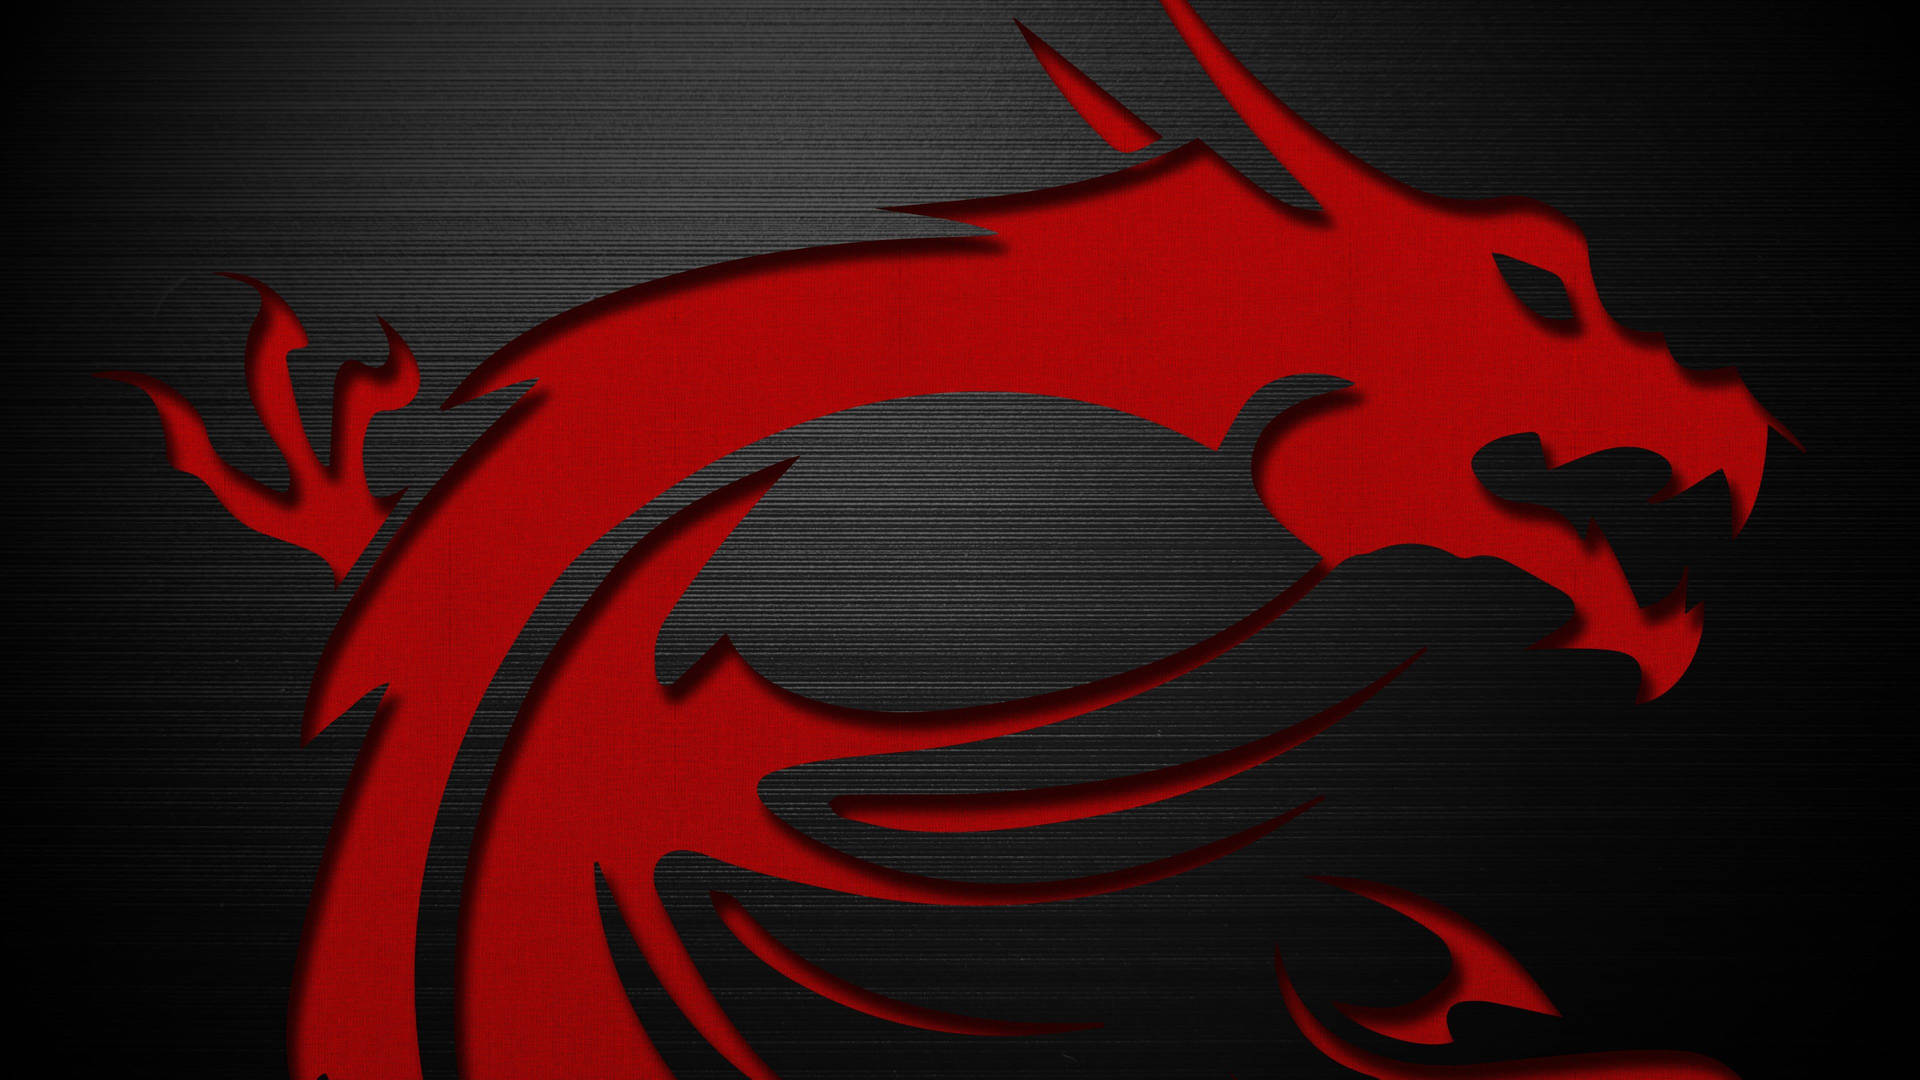 100+] Msi 4K Wallpapers For Free | Wallpapers.Com